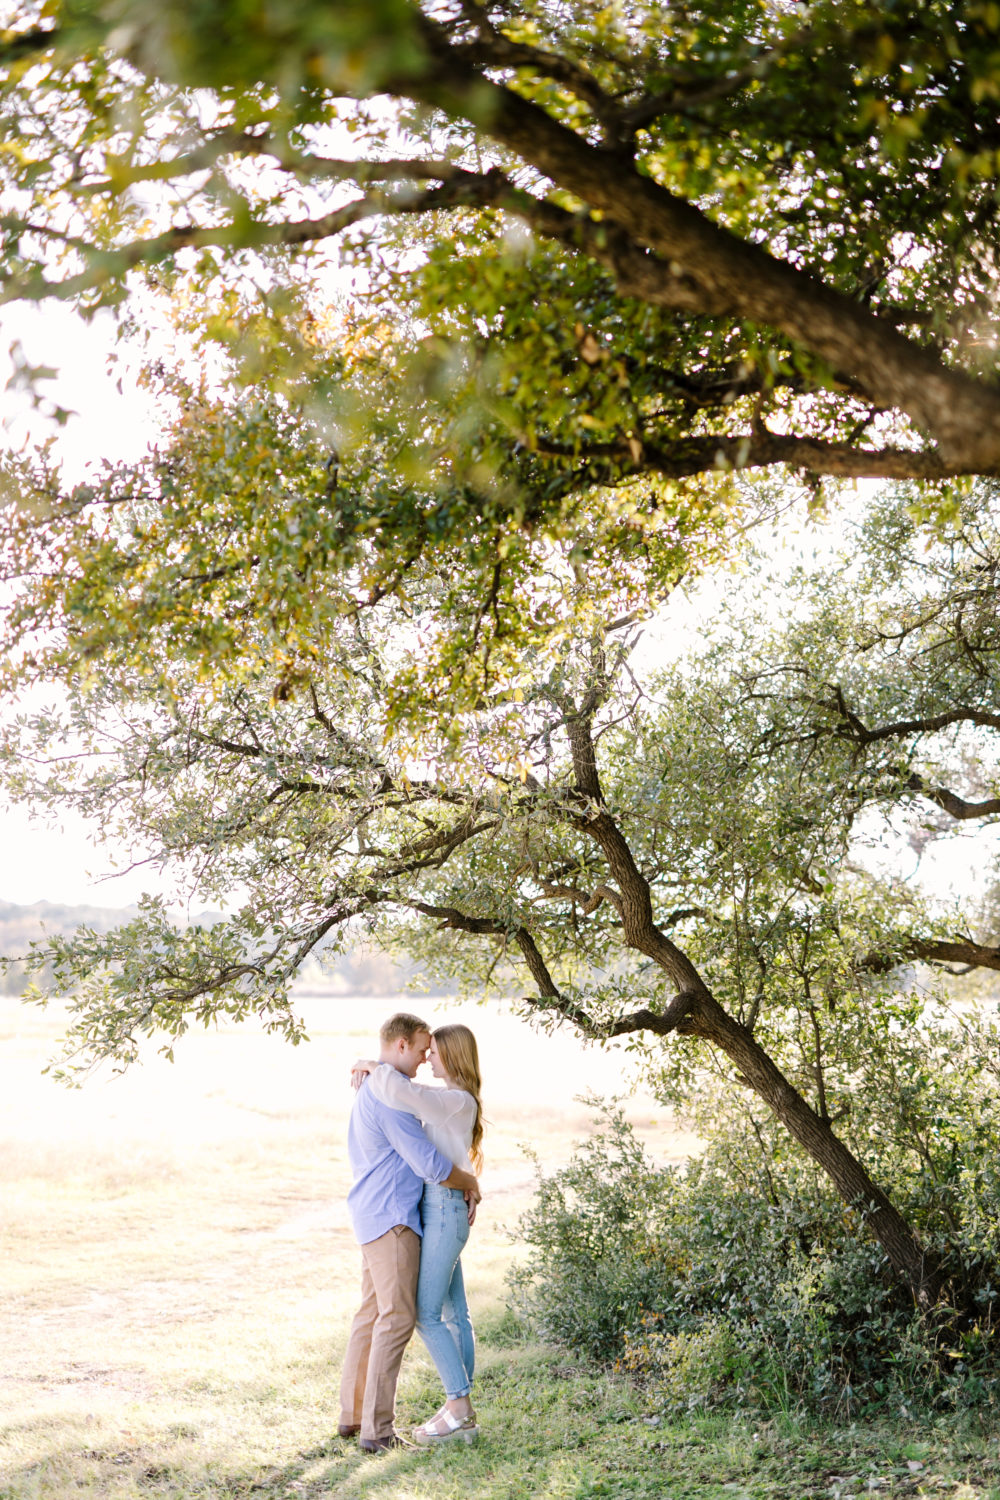 Engagement Outfit Tips – Julie Wilhite Photography | Austin Wedding Photographer